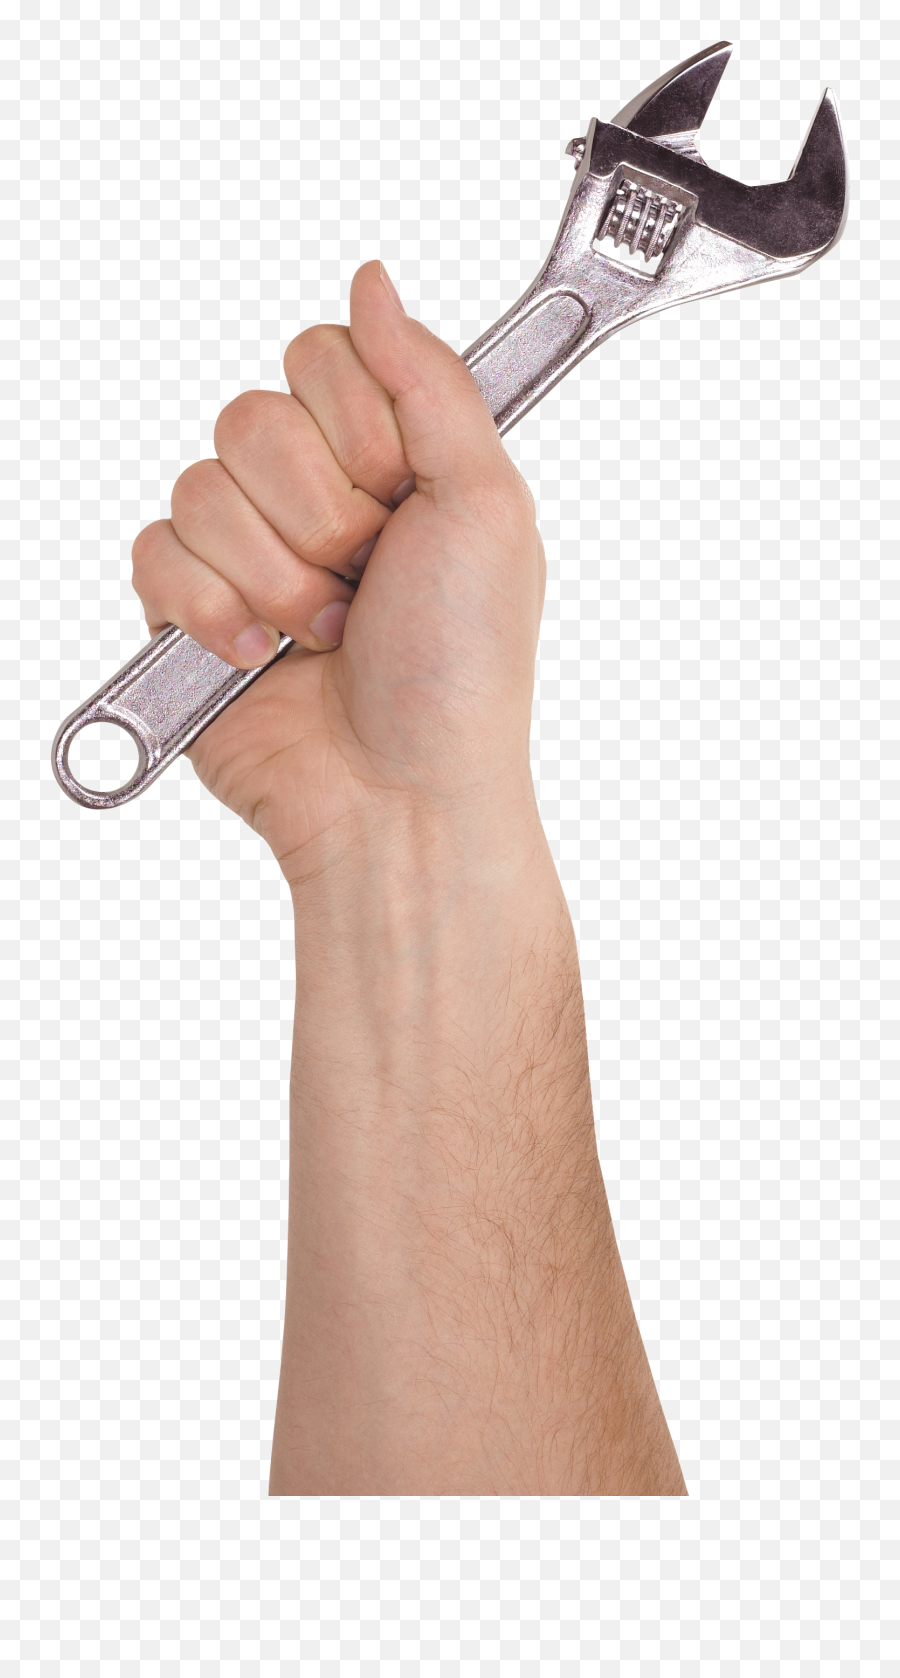 Wrench Spanner Png Image Free Download - Hand Holding Wrench Transparent,Wrench Png